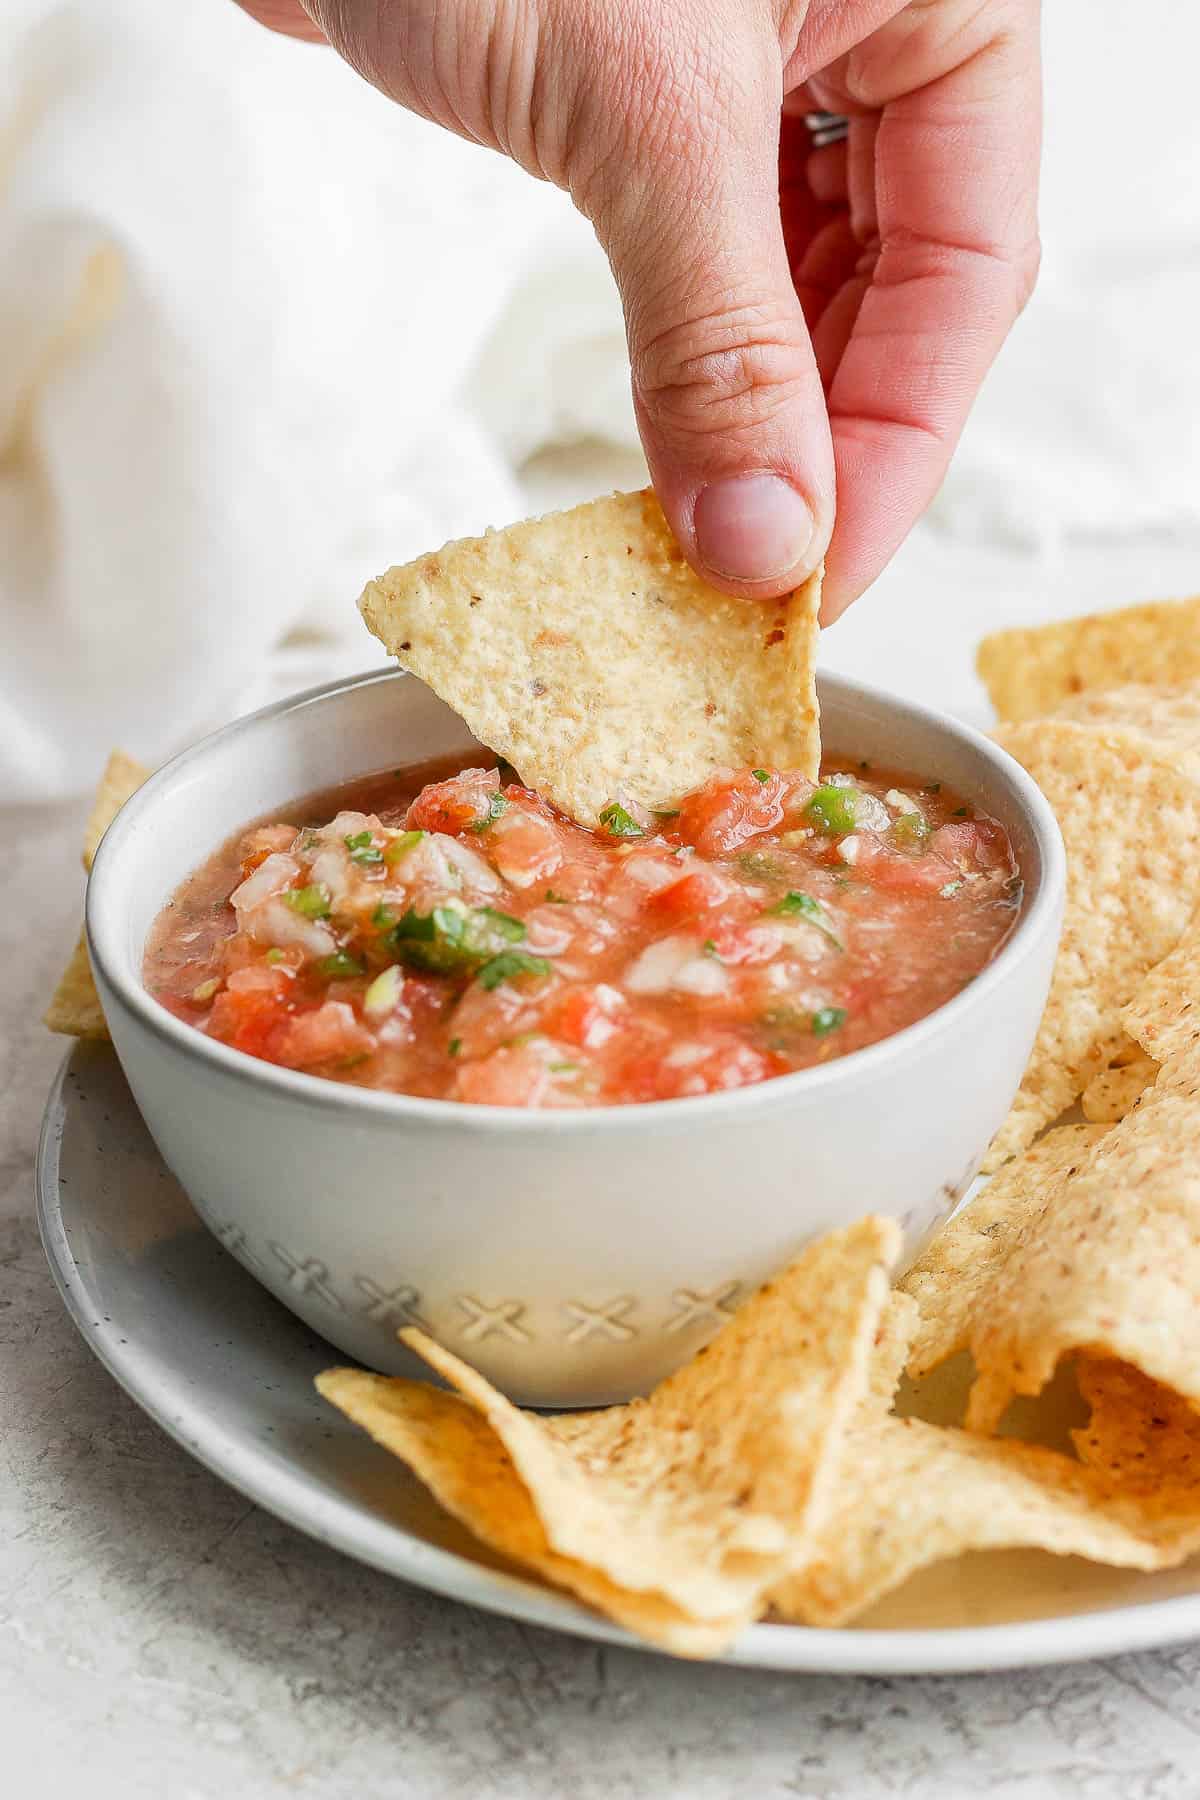 Chip dipping into homemade salsa in a small bowl